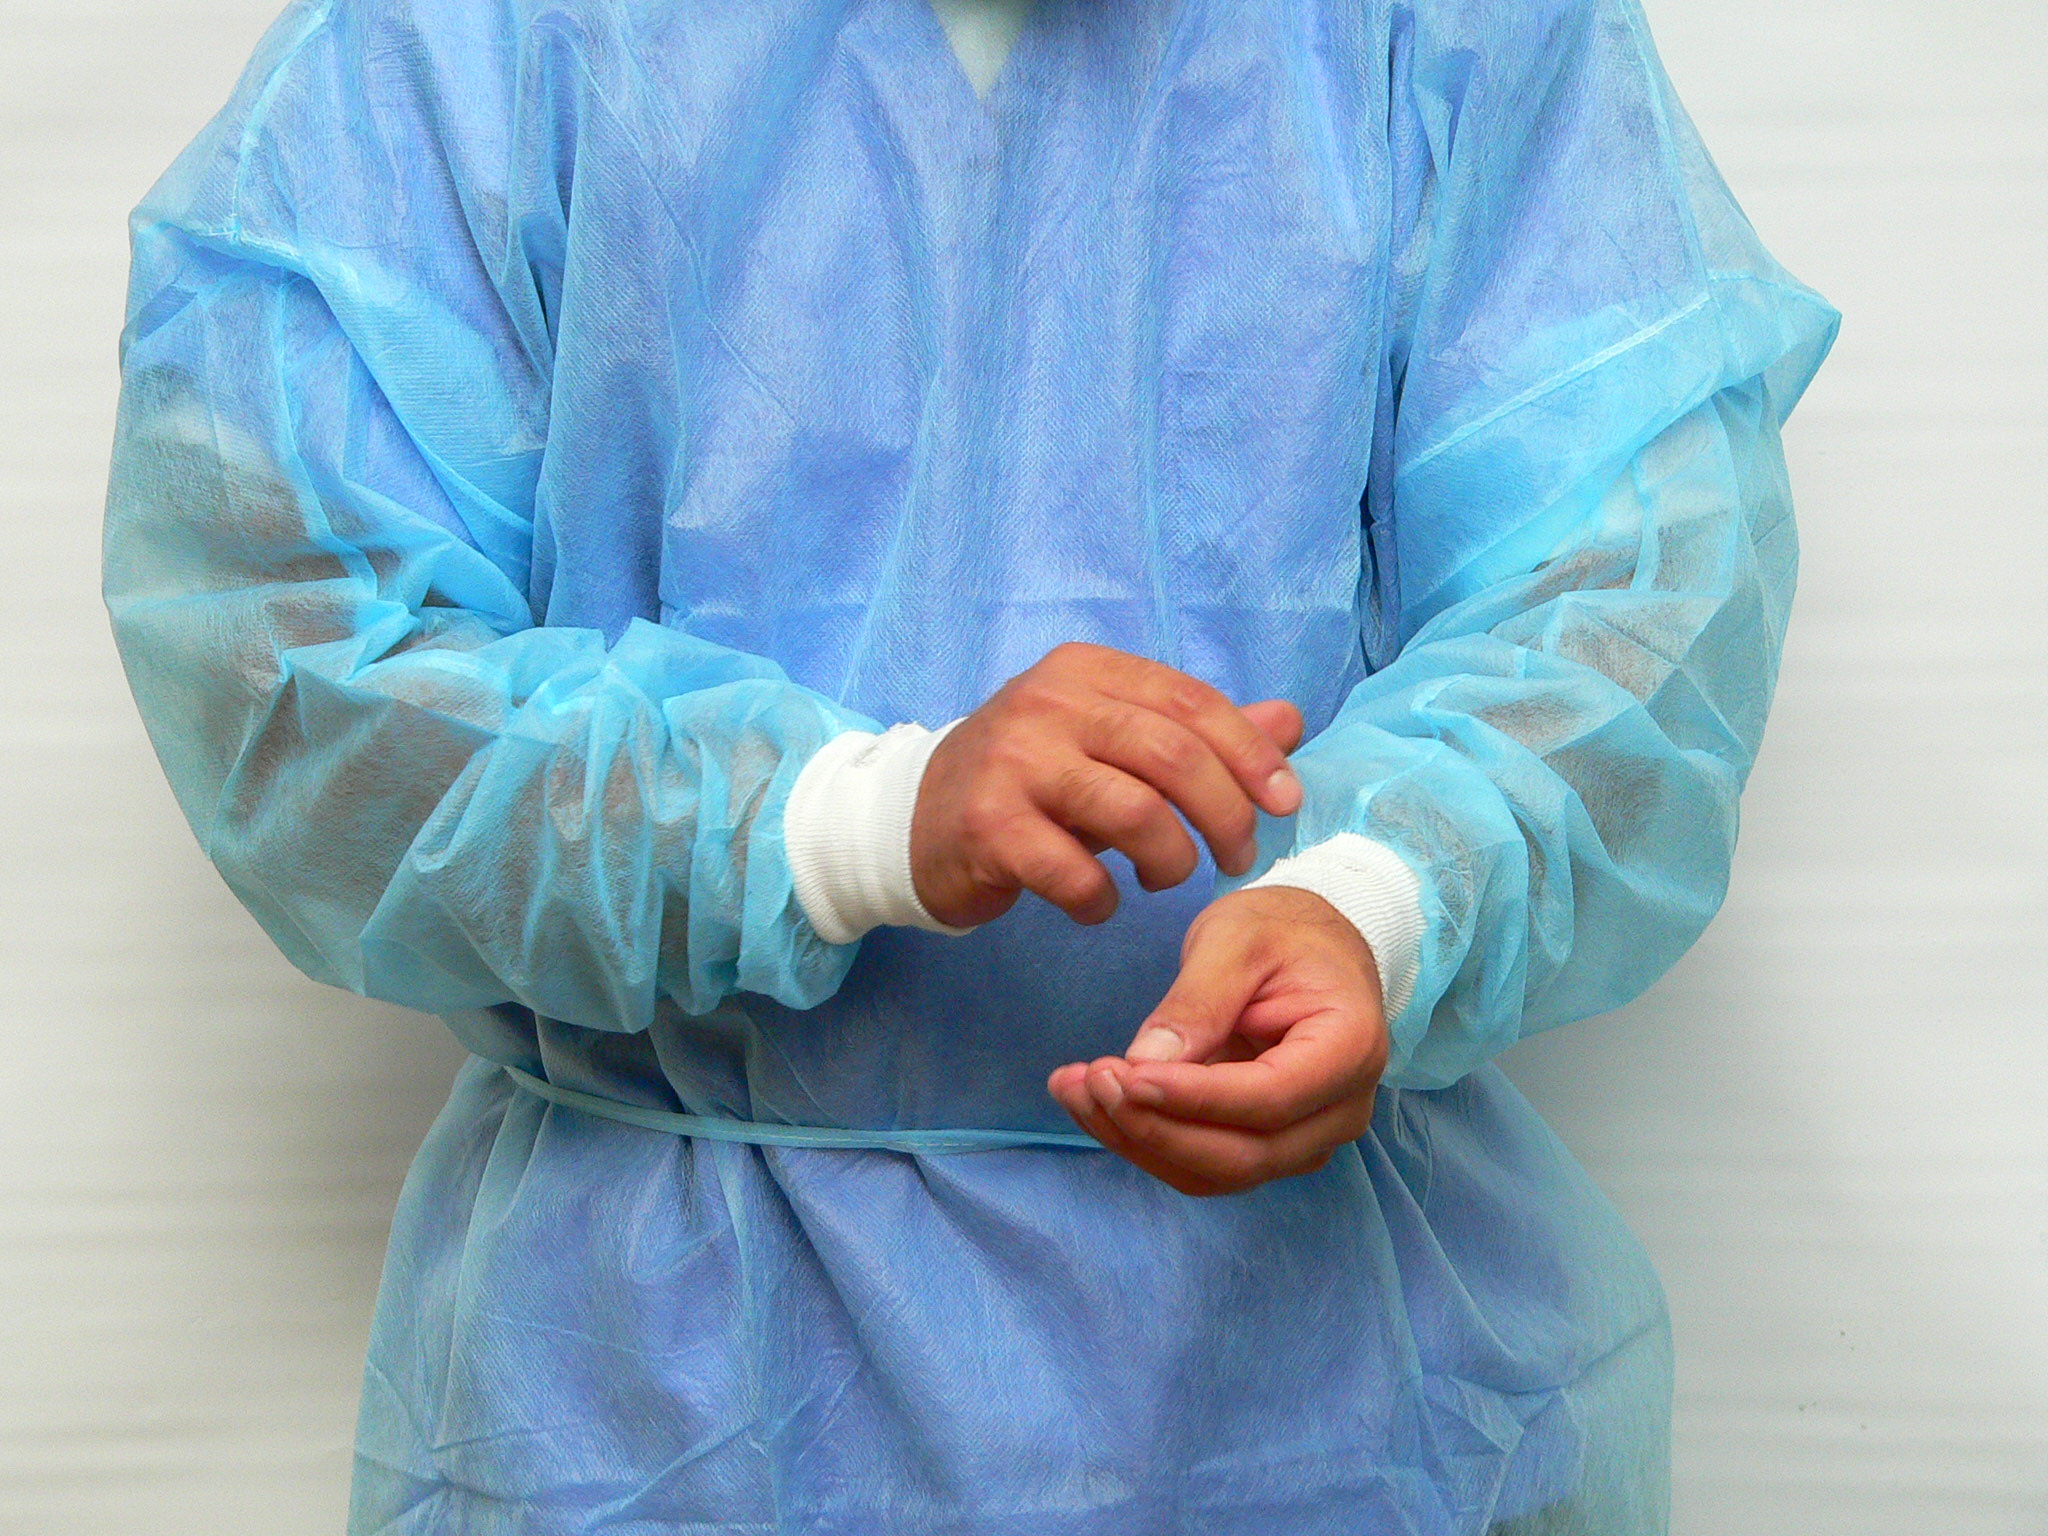 Disposable Blue Polypropylene Isolation Gowns with Knit Cuffs